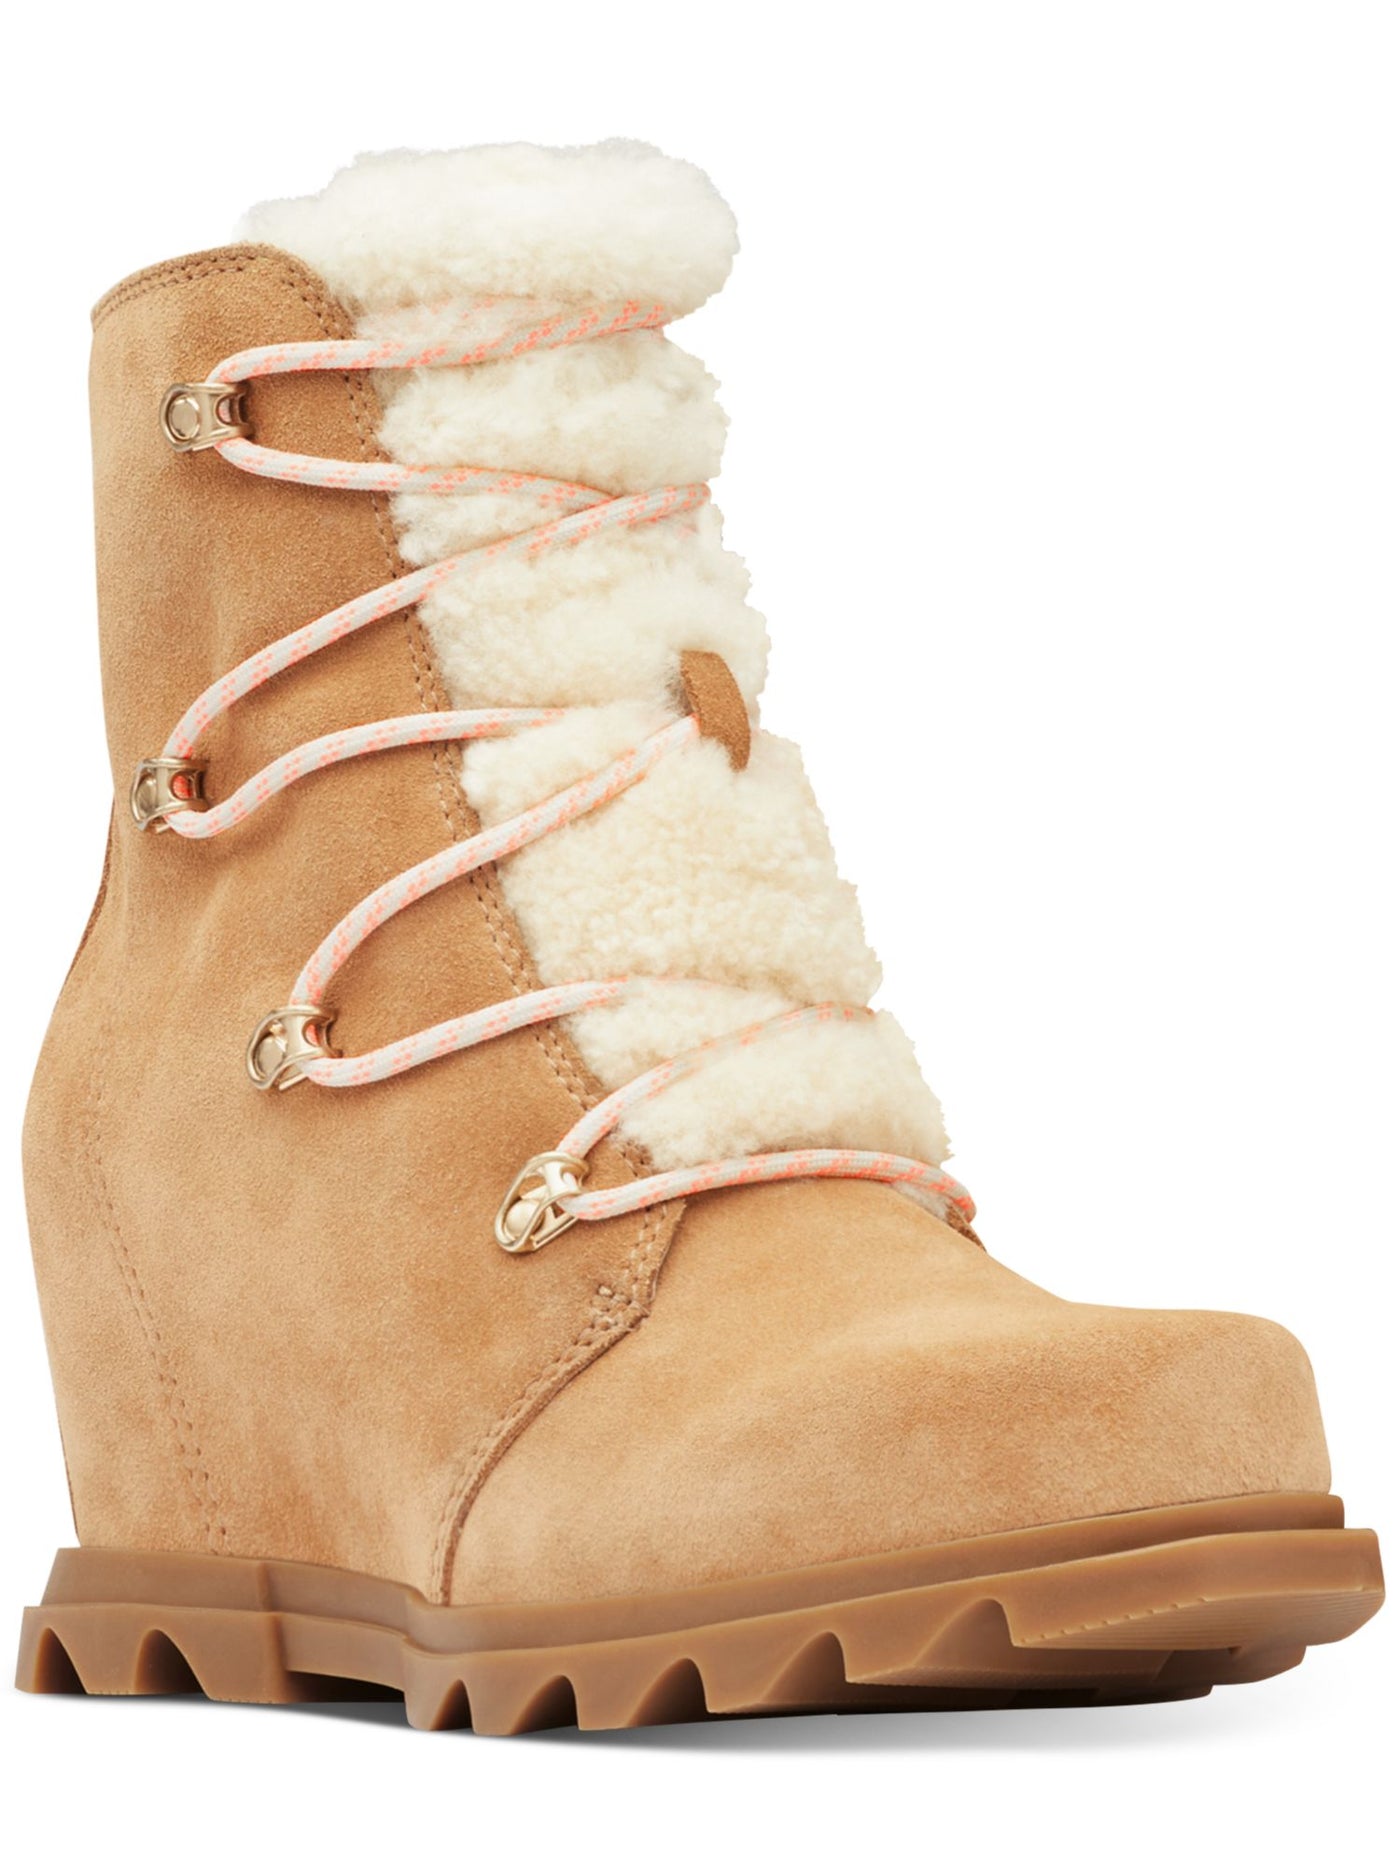 SOREL Womens Beige Shearling Tongue Padded Round Toe Lace-Up Leather Booties 5